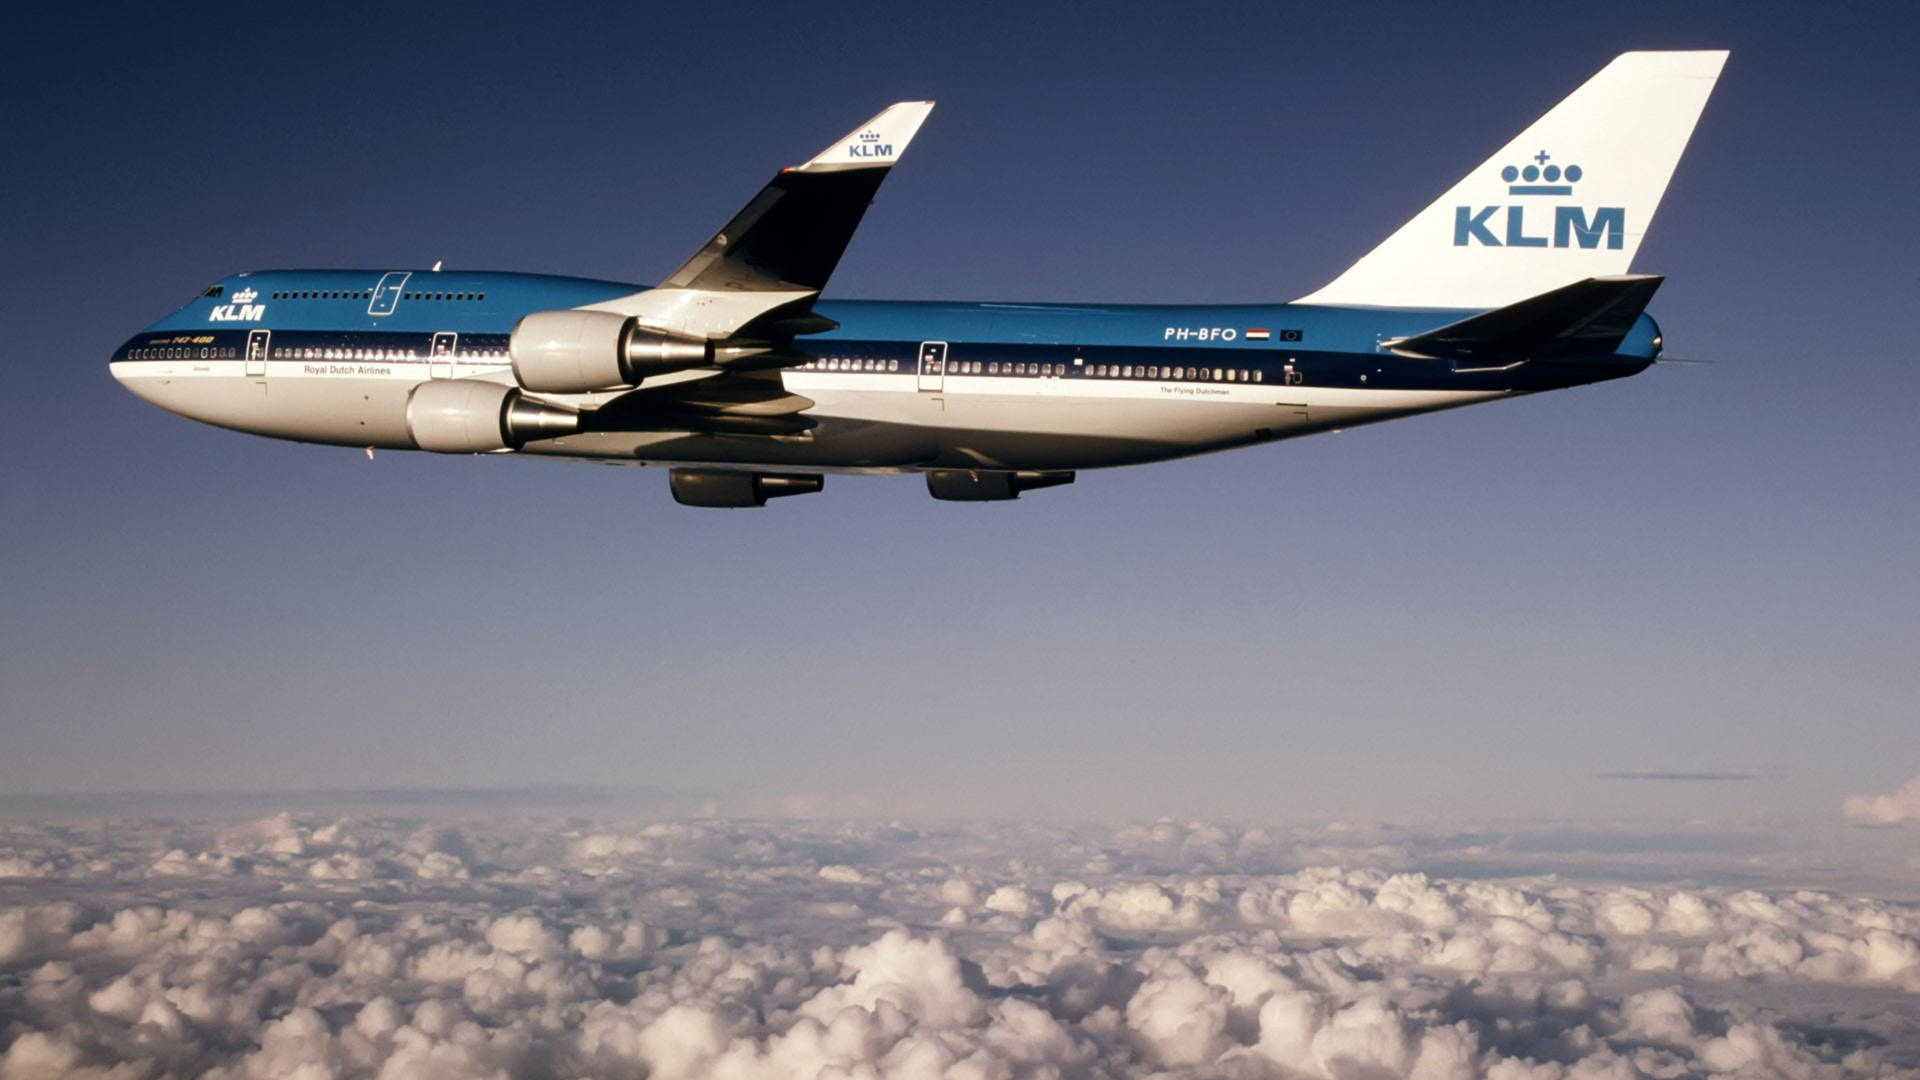 Blue And White Klm Airplane 4k Background